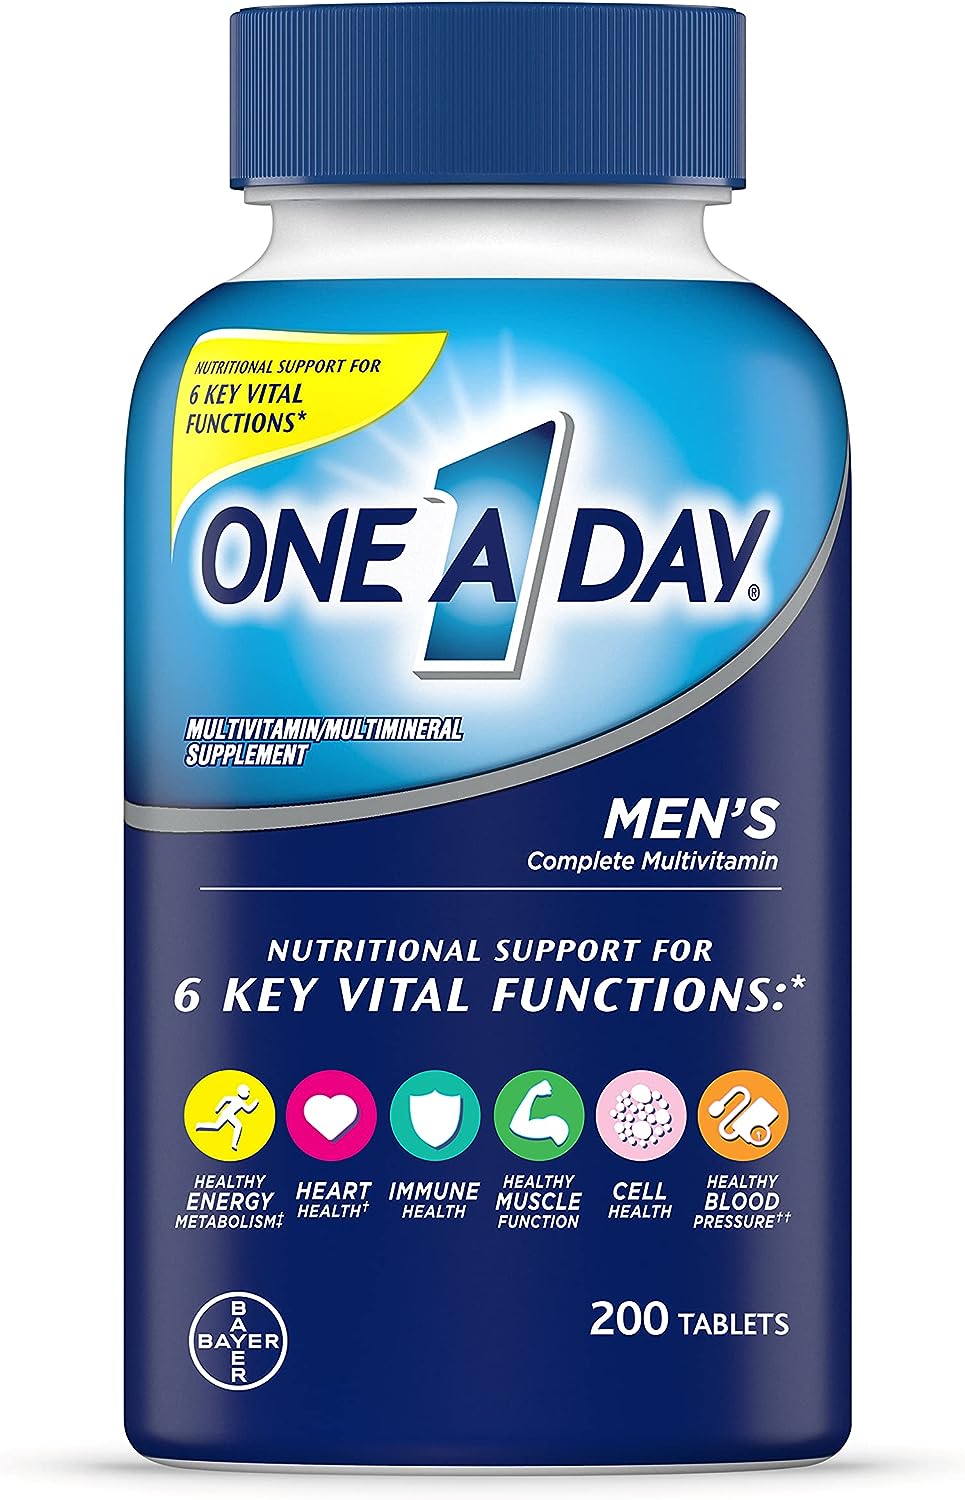 One A Day Men’s Multivitamin Review